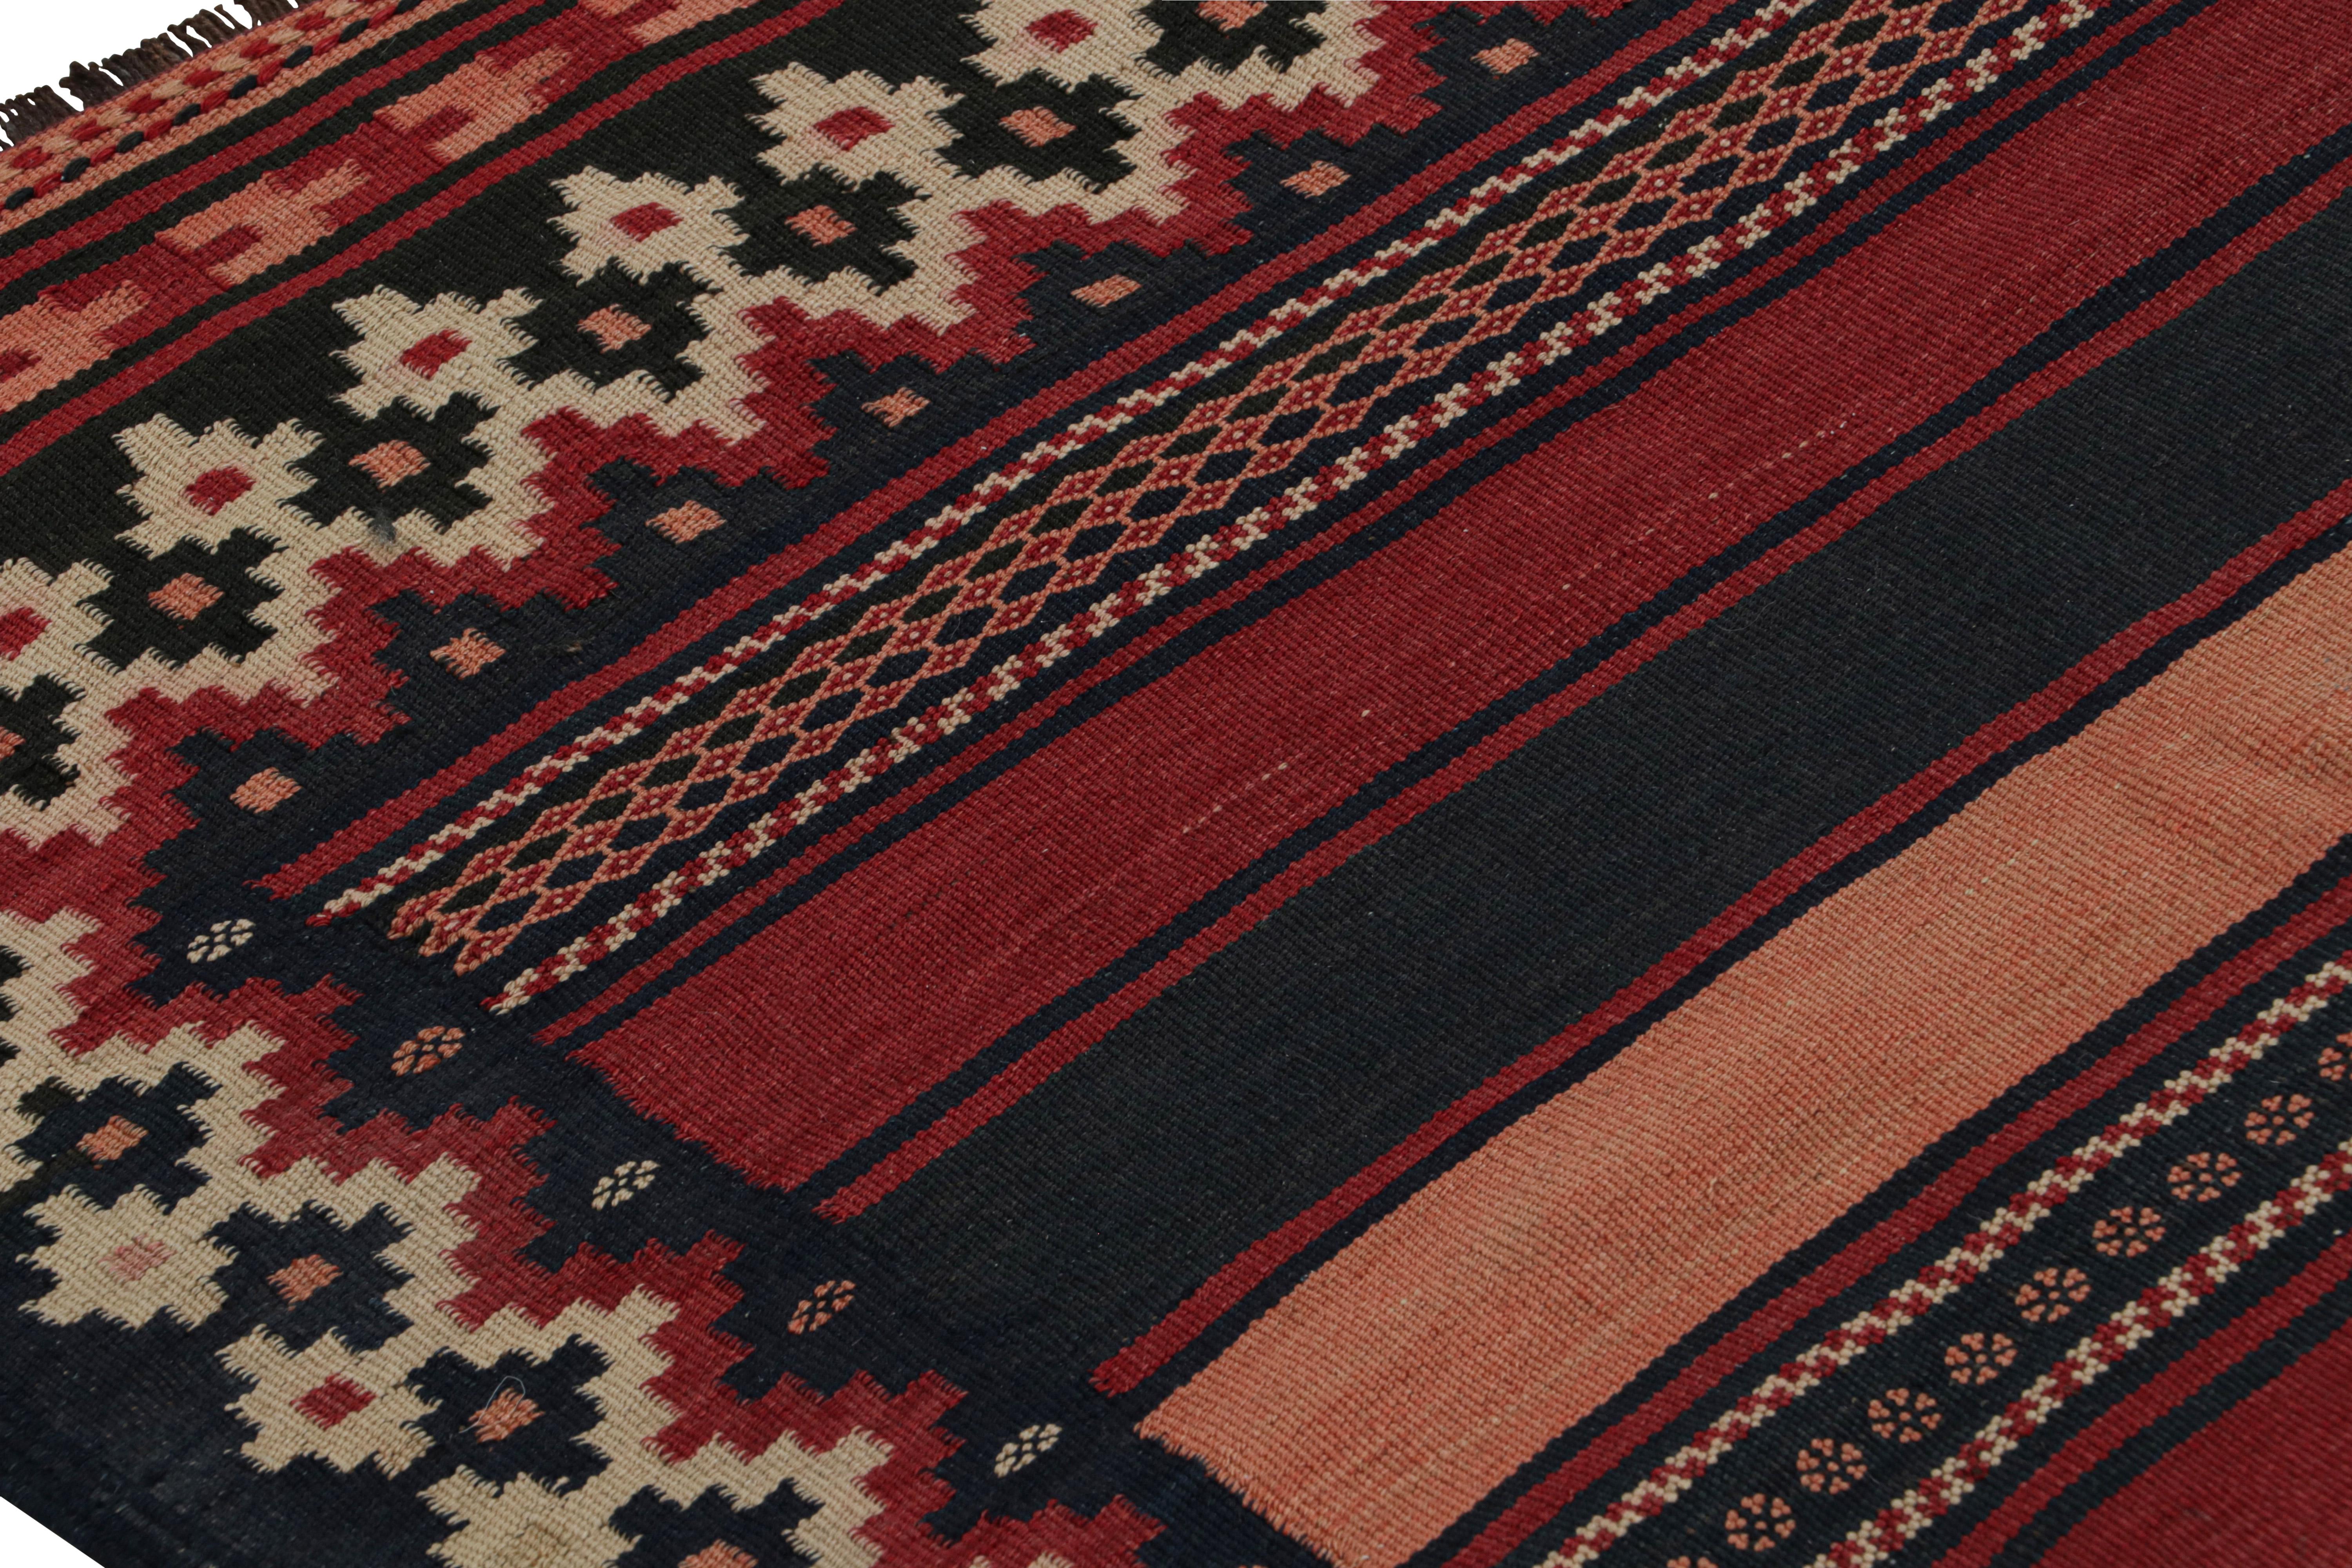 Vintage Afghani tribal Kilim runner rug, in Beige/brown, from Rug & Kilim In Good Condition For Sale In Long Island City, NY